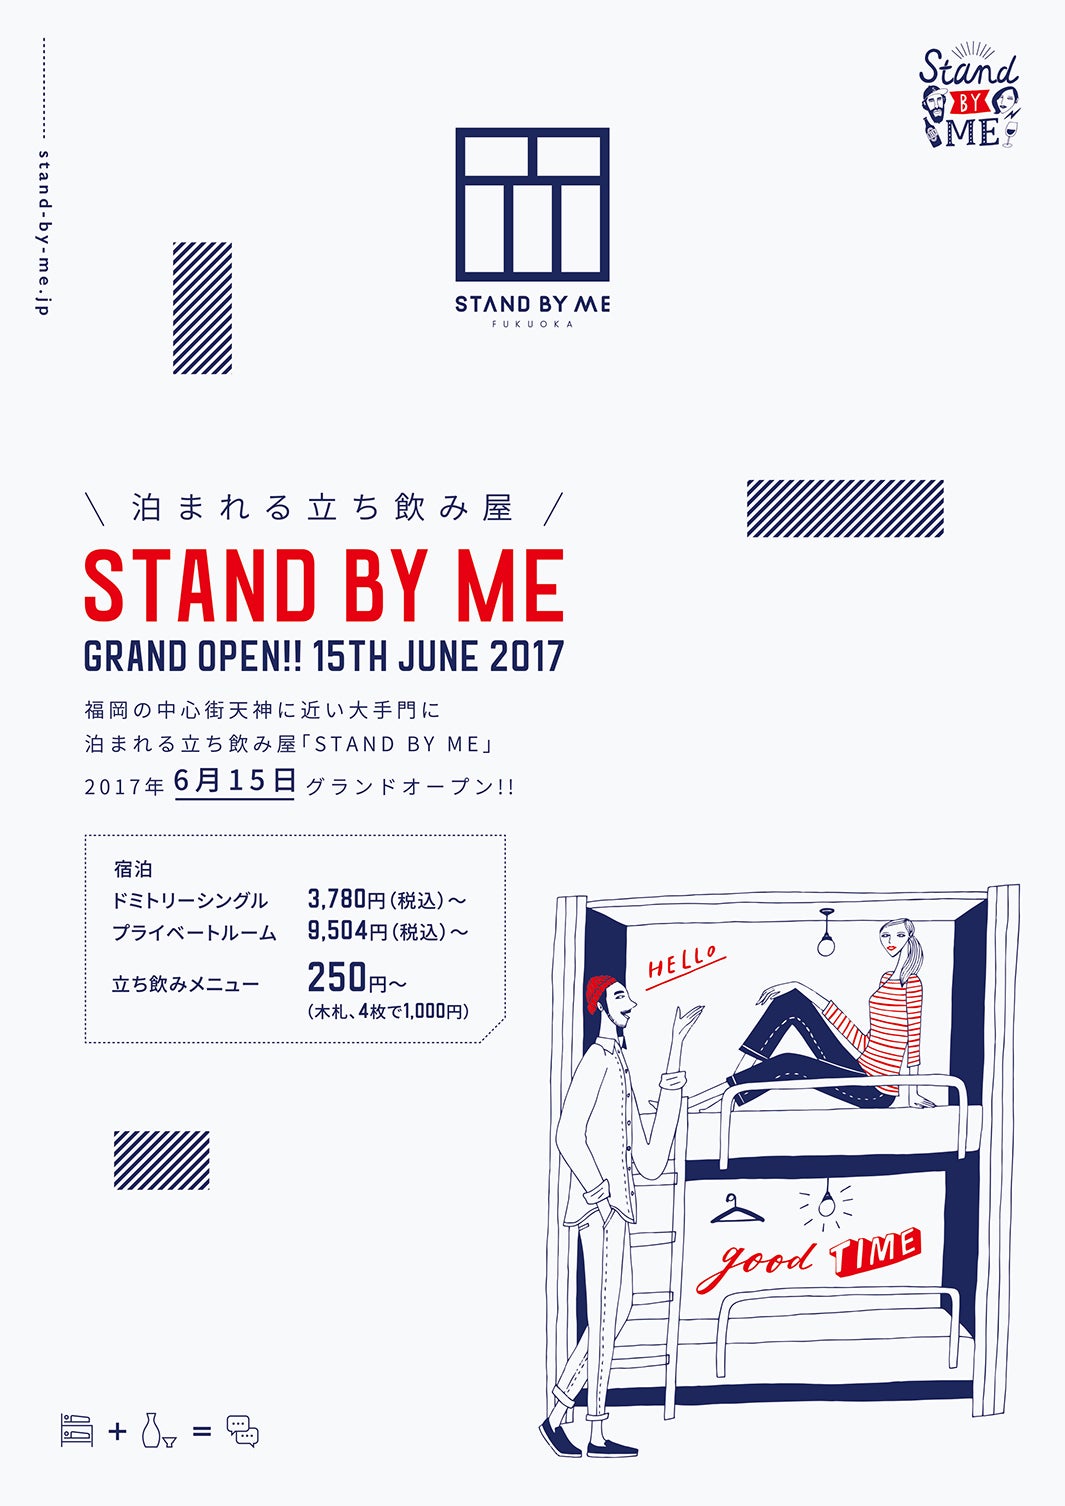 STAND BY ME／画像提供：STAND BY ME